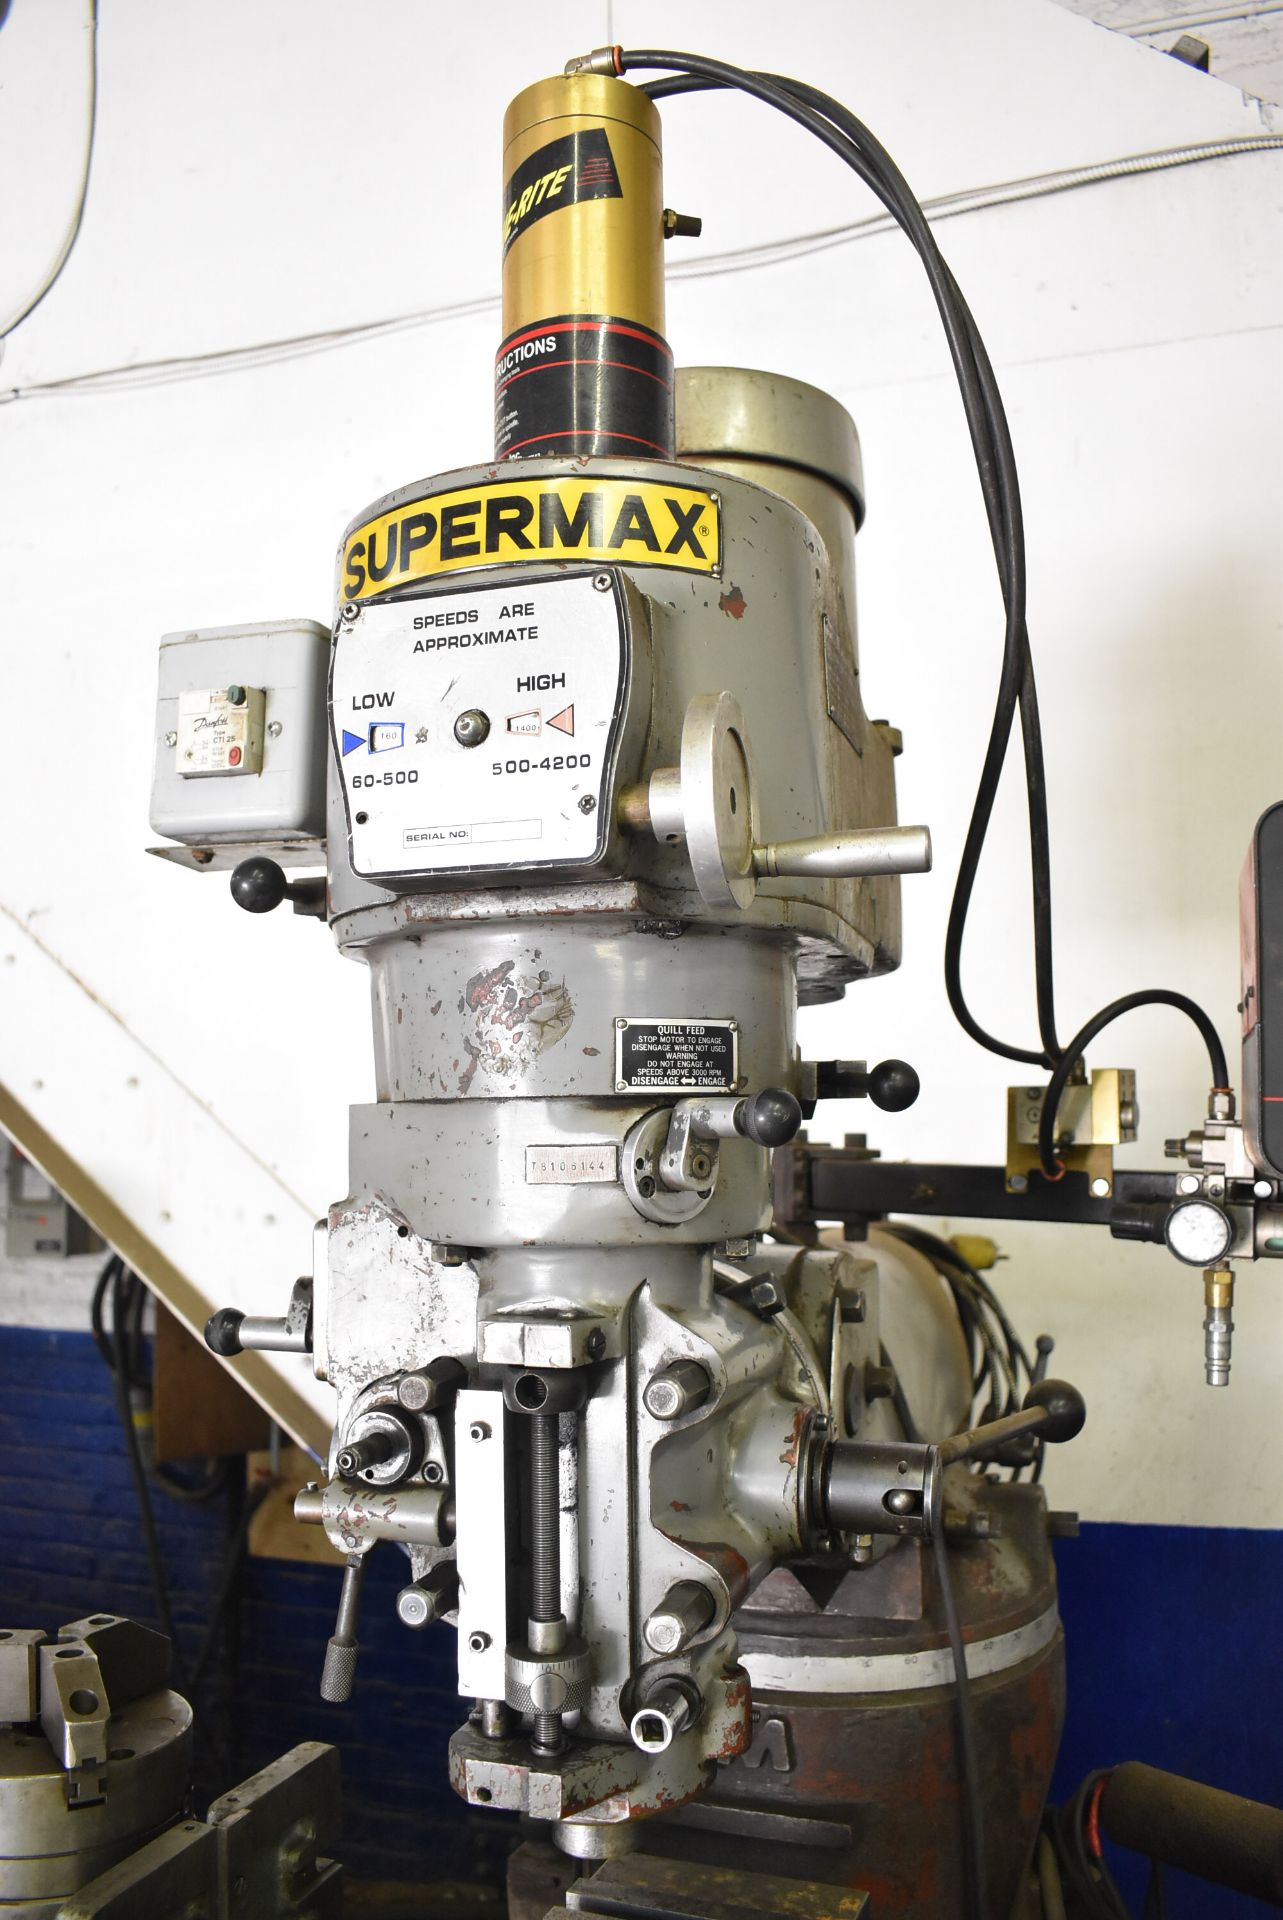 SUPERMAX VC-1-VS-T VERTICAL MILLING MACHINE WITH 9"X42" TABLE, SPEEDS TO 4200 RPM, MAXI TORQUE- - Image 2 of 11